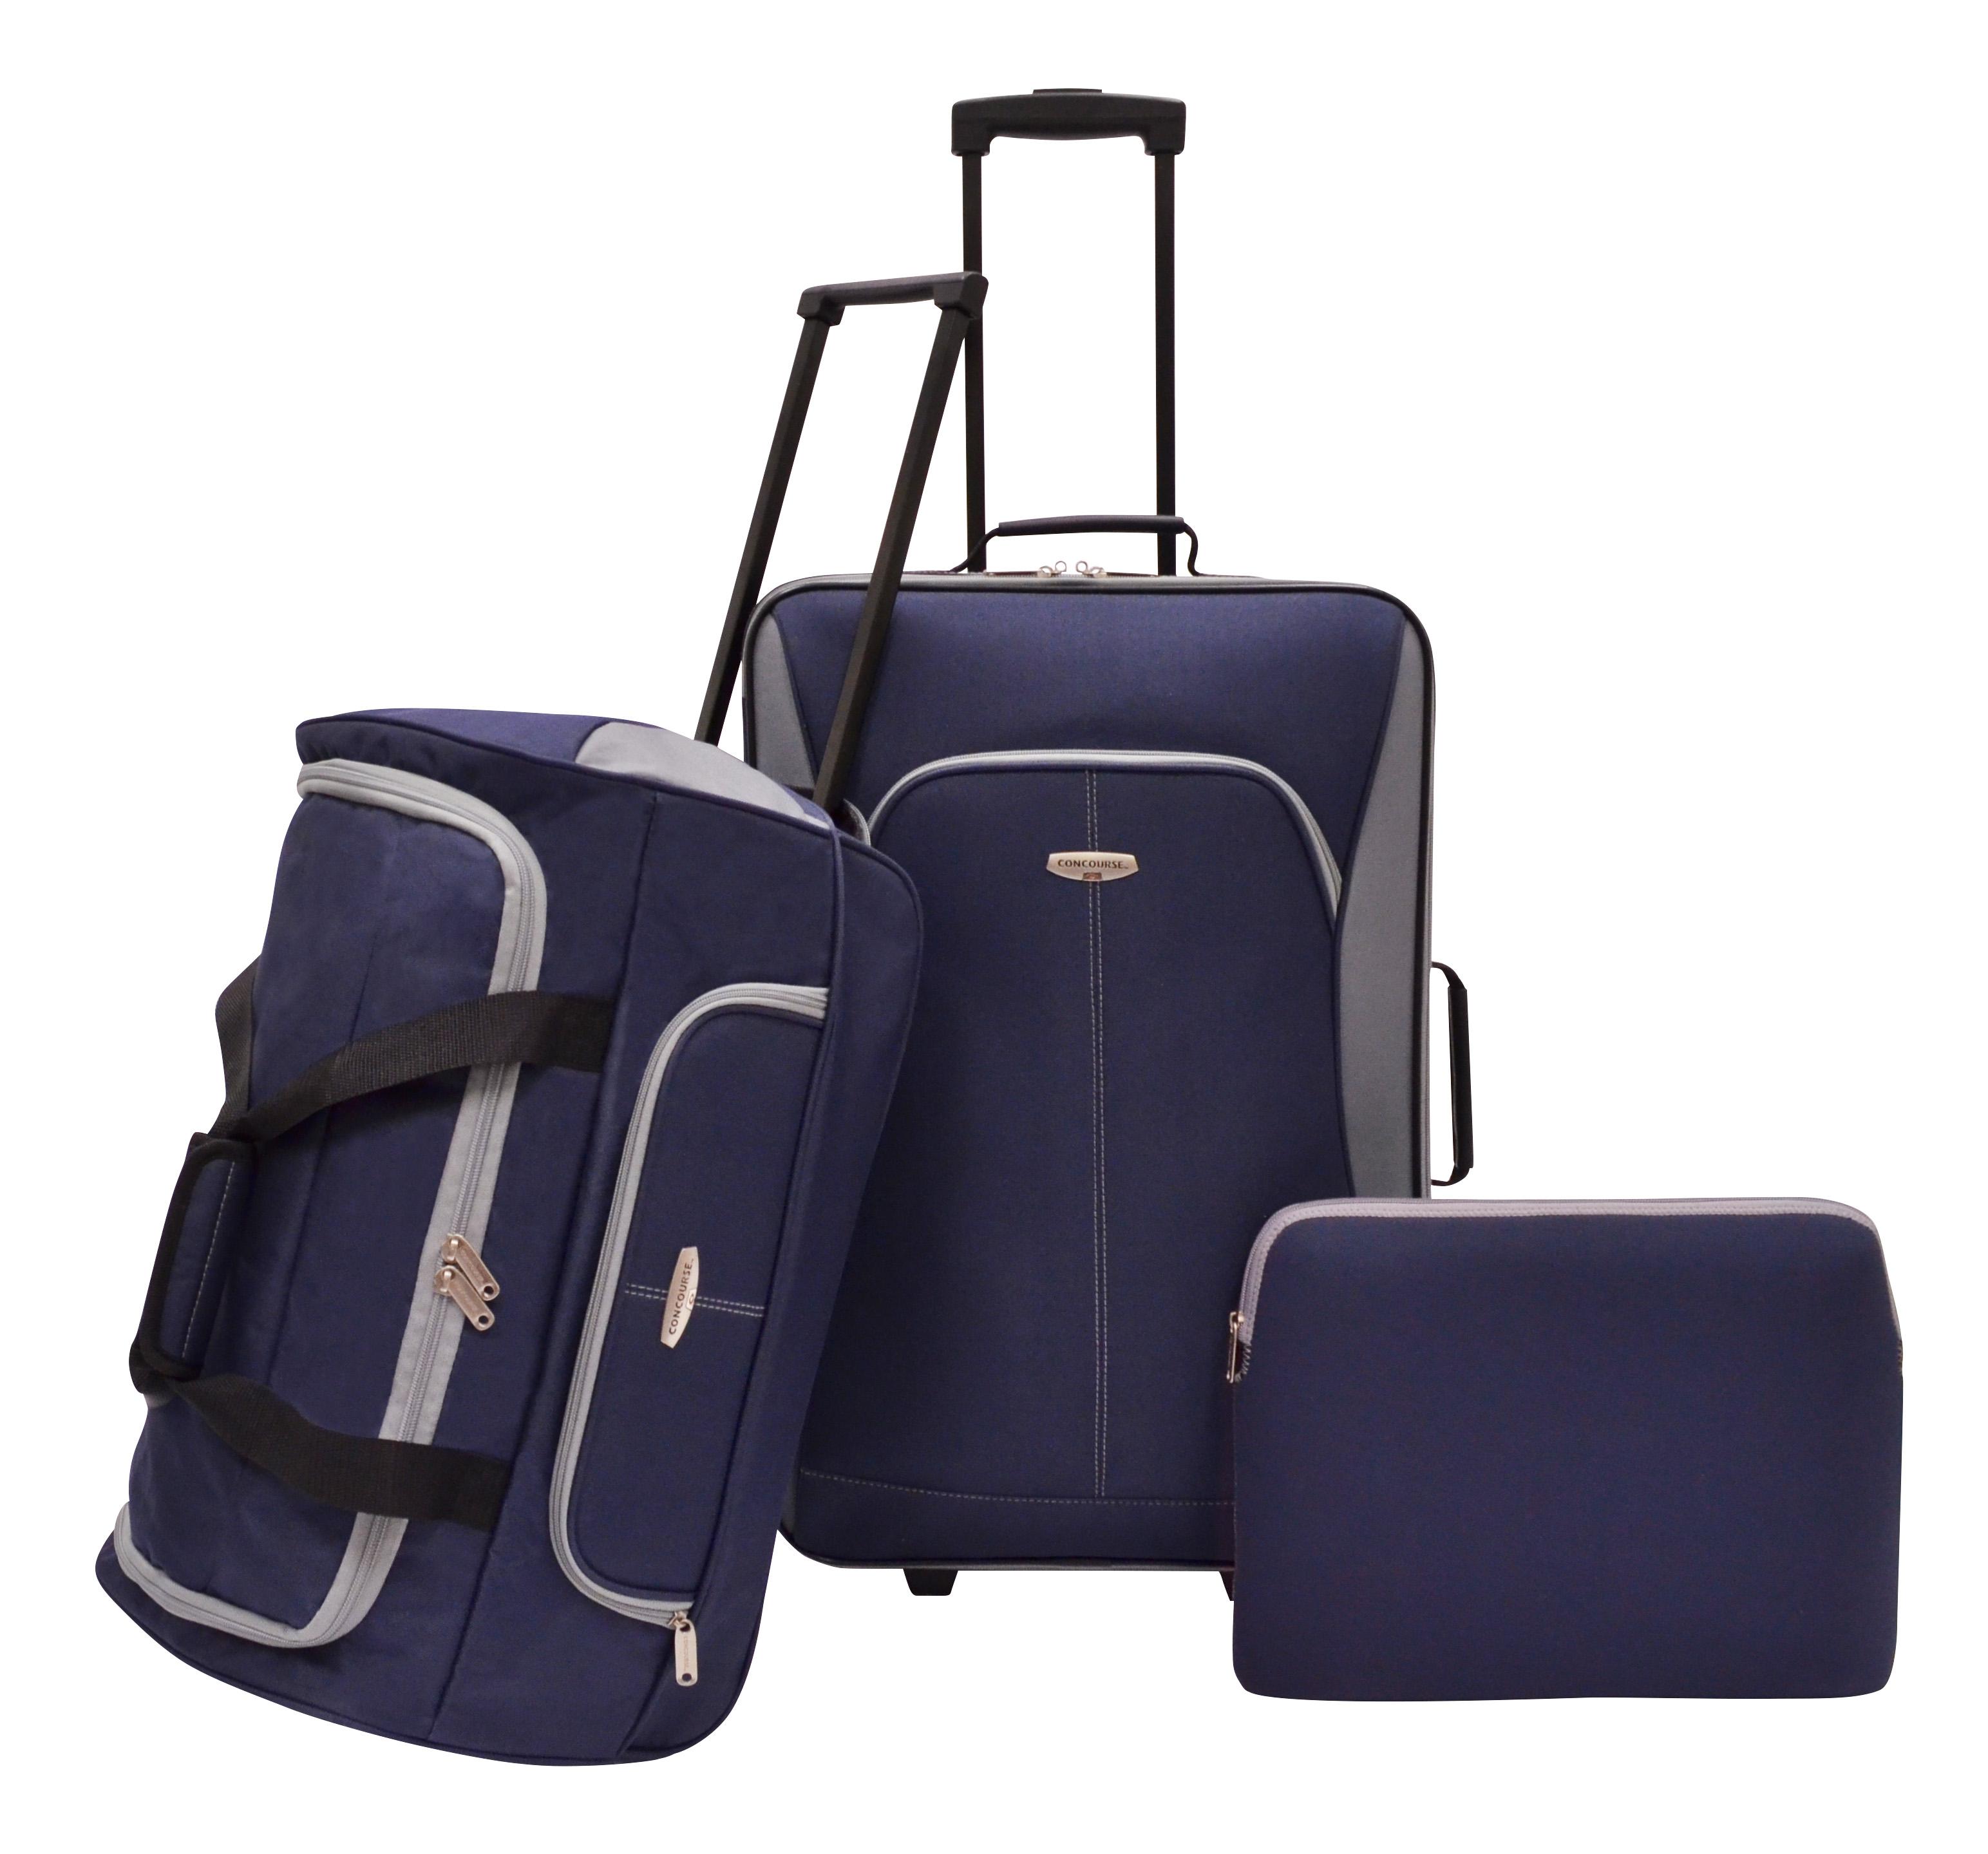 Macy's nine west luggage set 3pce, traveling with luggage on trains in ...